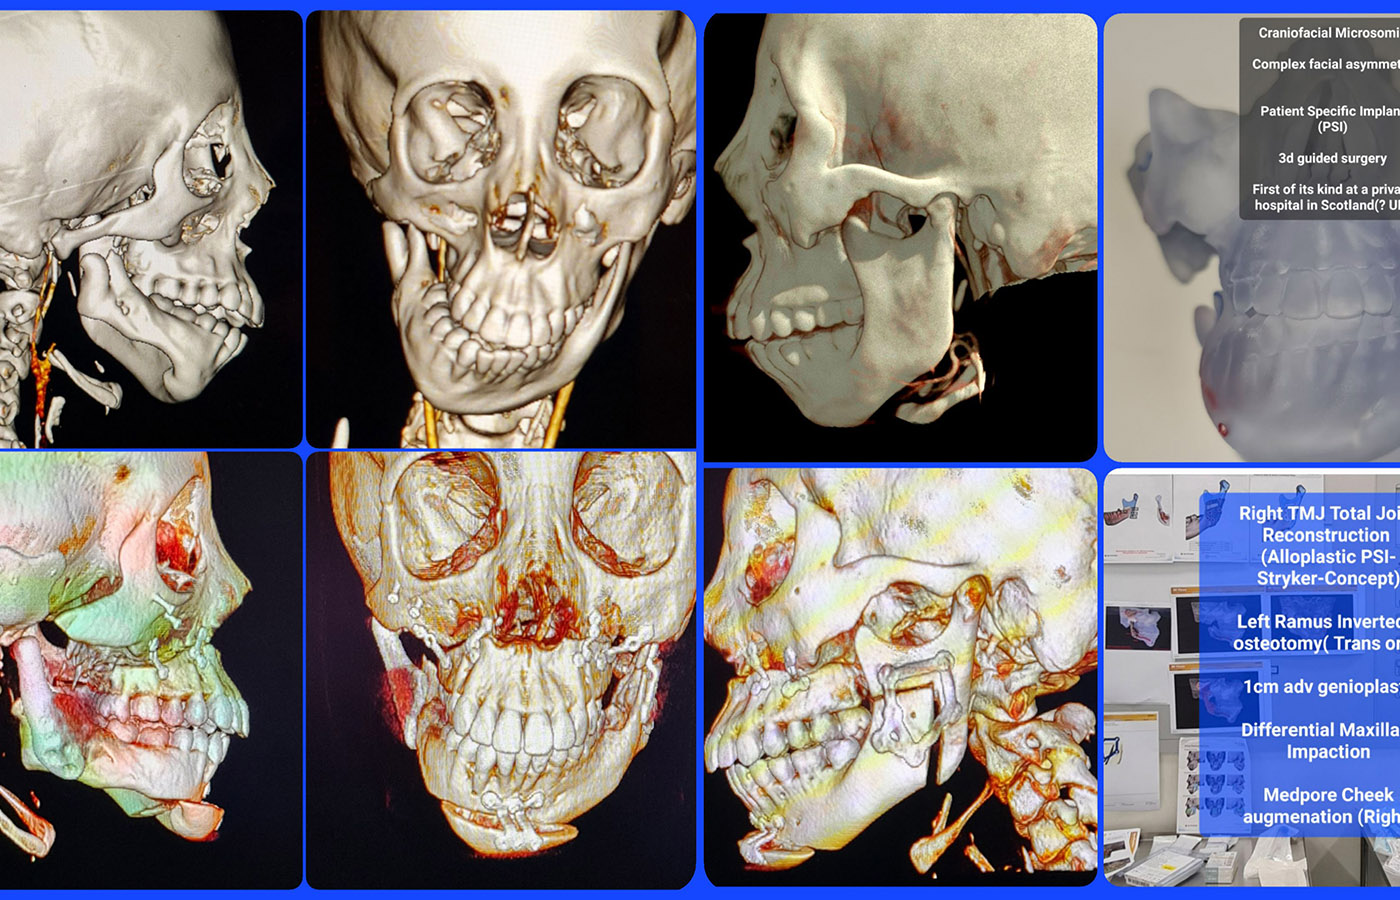 Facial reconstruction. (Scan images showing the extent of complex facial & jaw joint reconstructions).